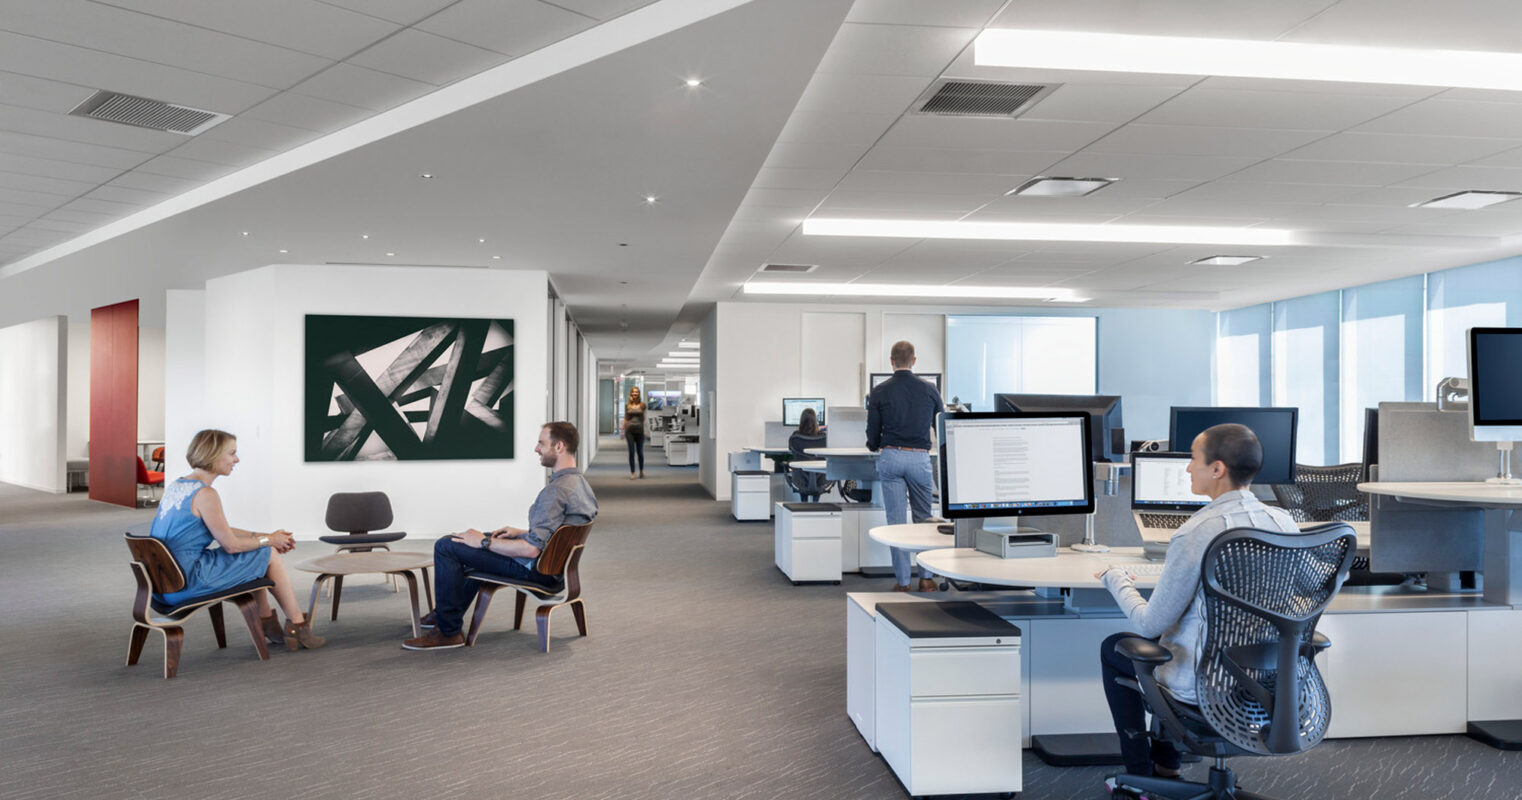 Open-plan office space with natural lighting, featuring modern furnishings—a mixture of ergonomic office chairs, personal workstations, and a casual seating area for discussions. White walls are complemented by a large, abstract green artwork, enhancing the contemporary feel.